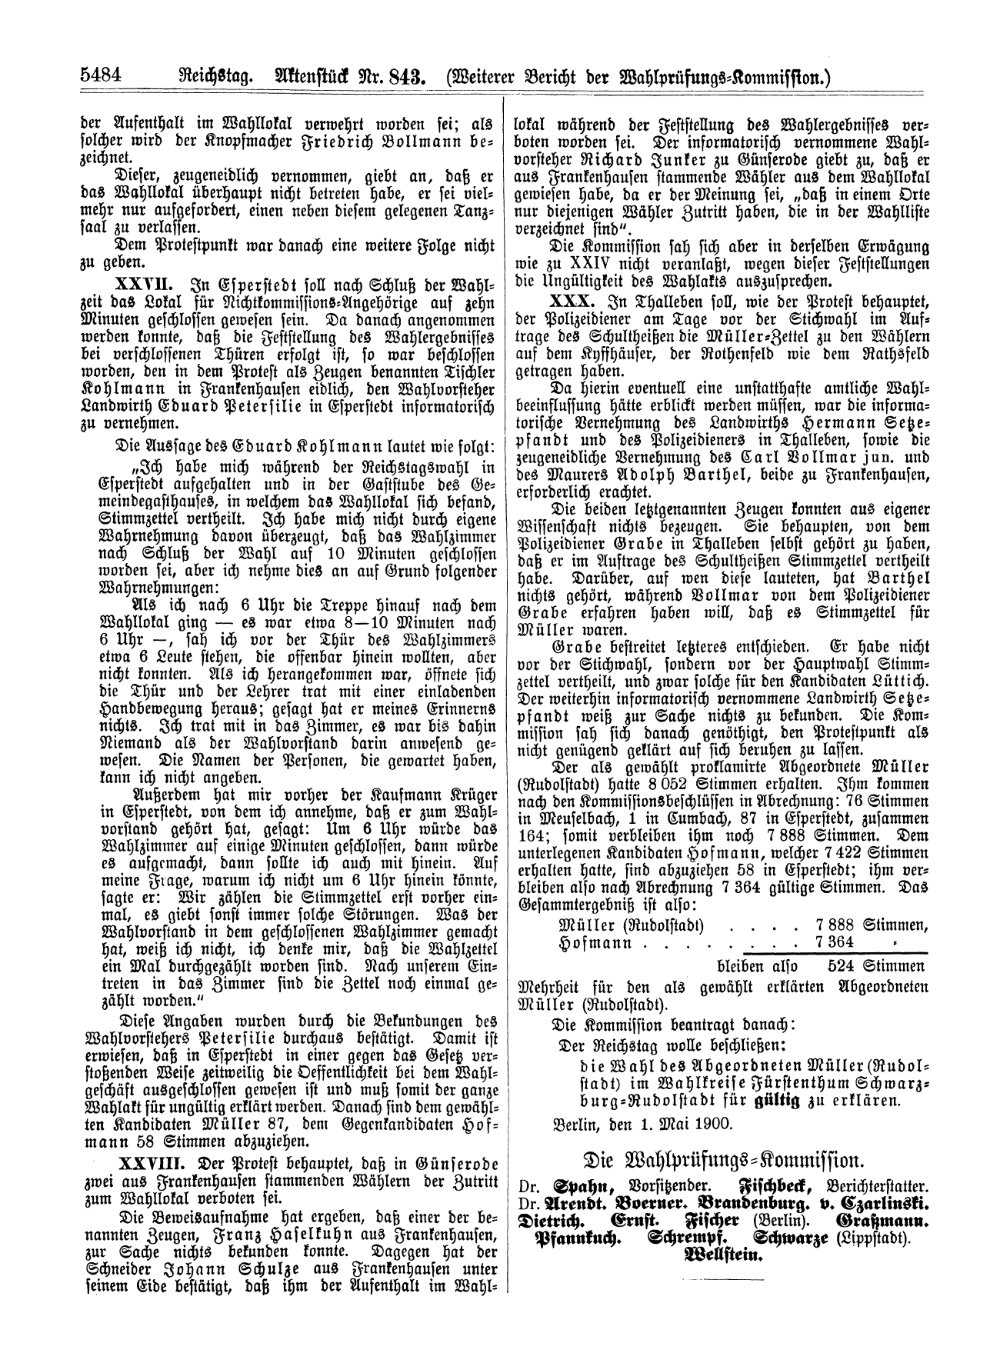 Scan of page 5484